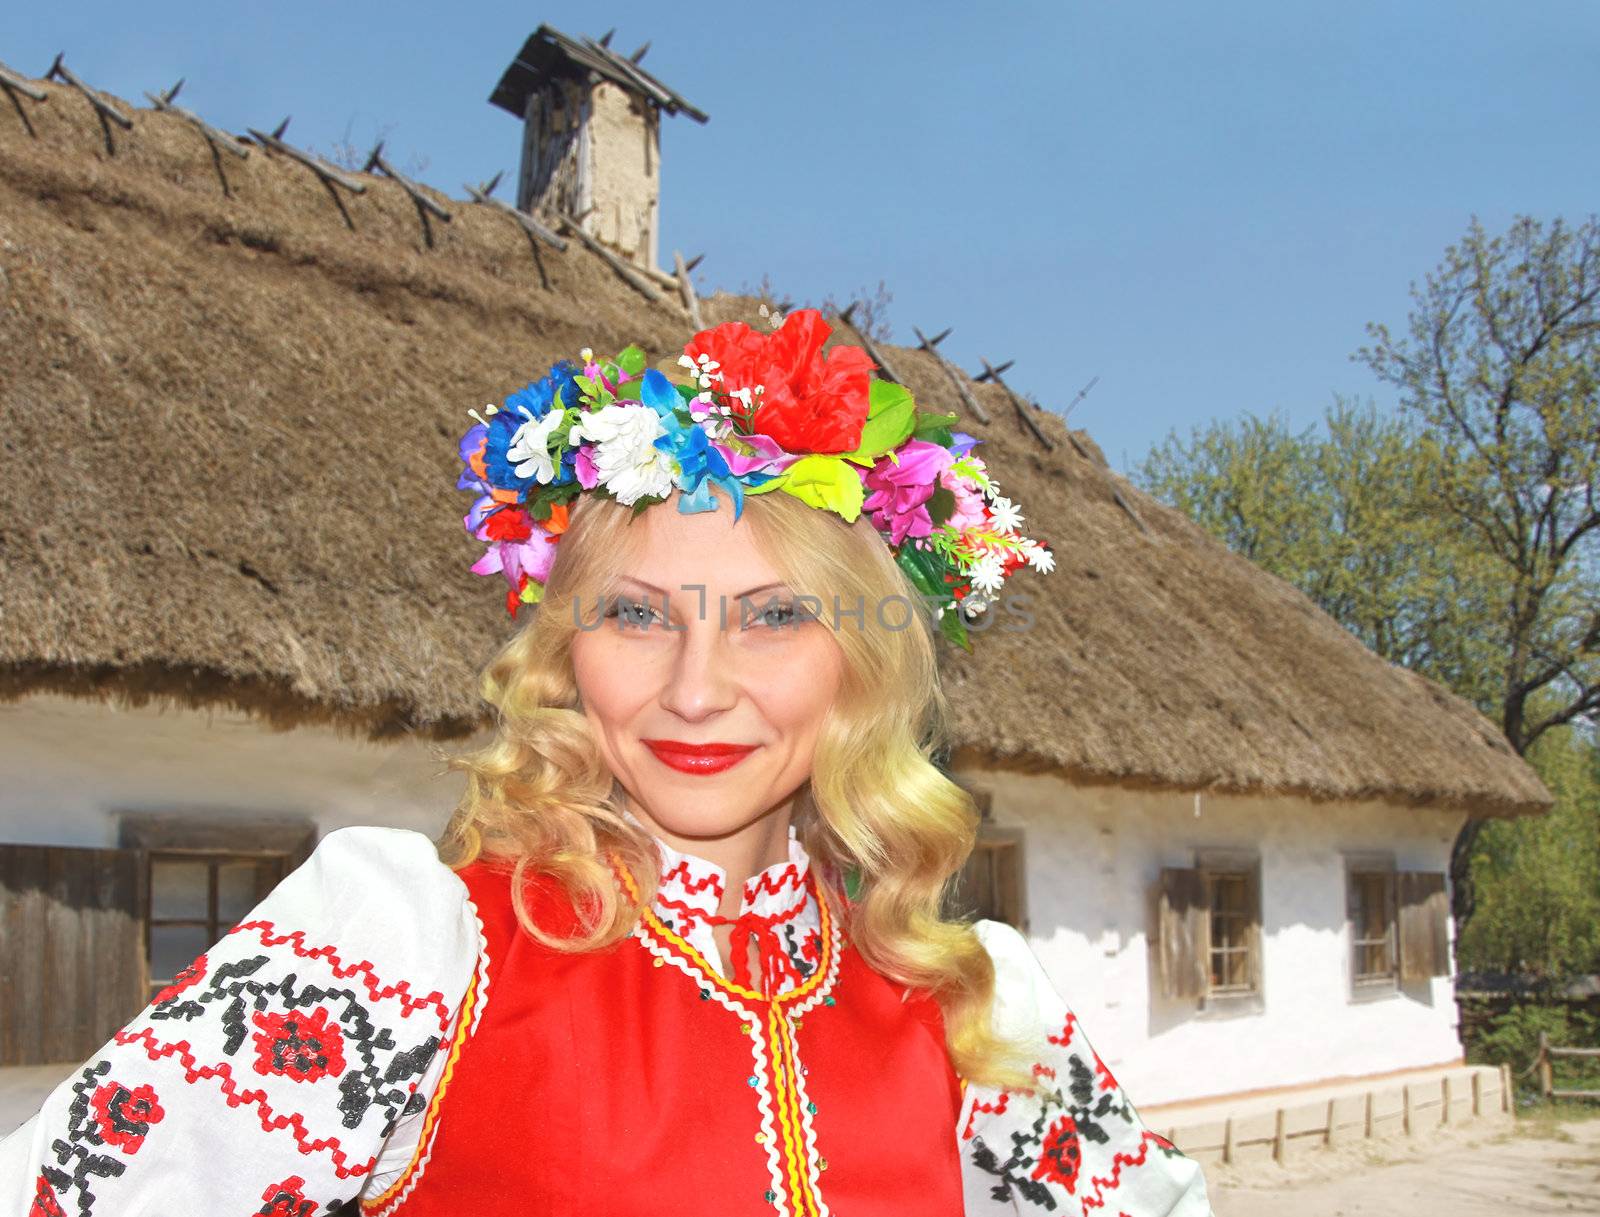 Beautiful Ukrainian girl in national clothes near the rural hous by NickNick